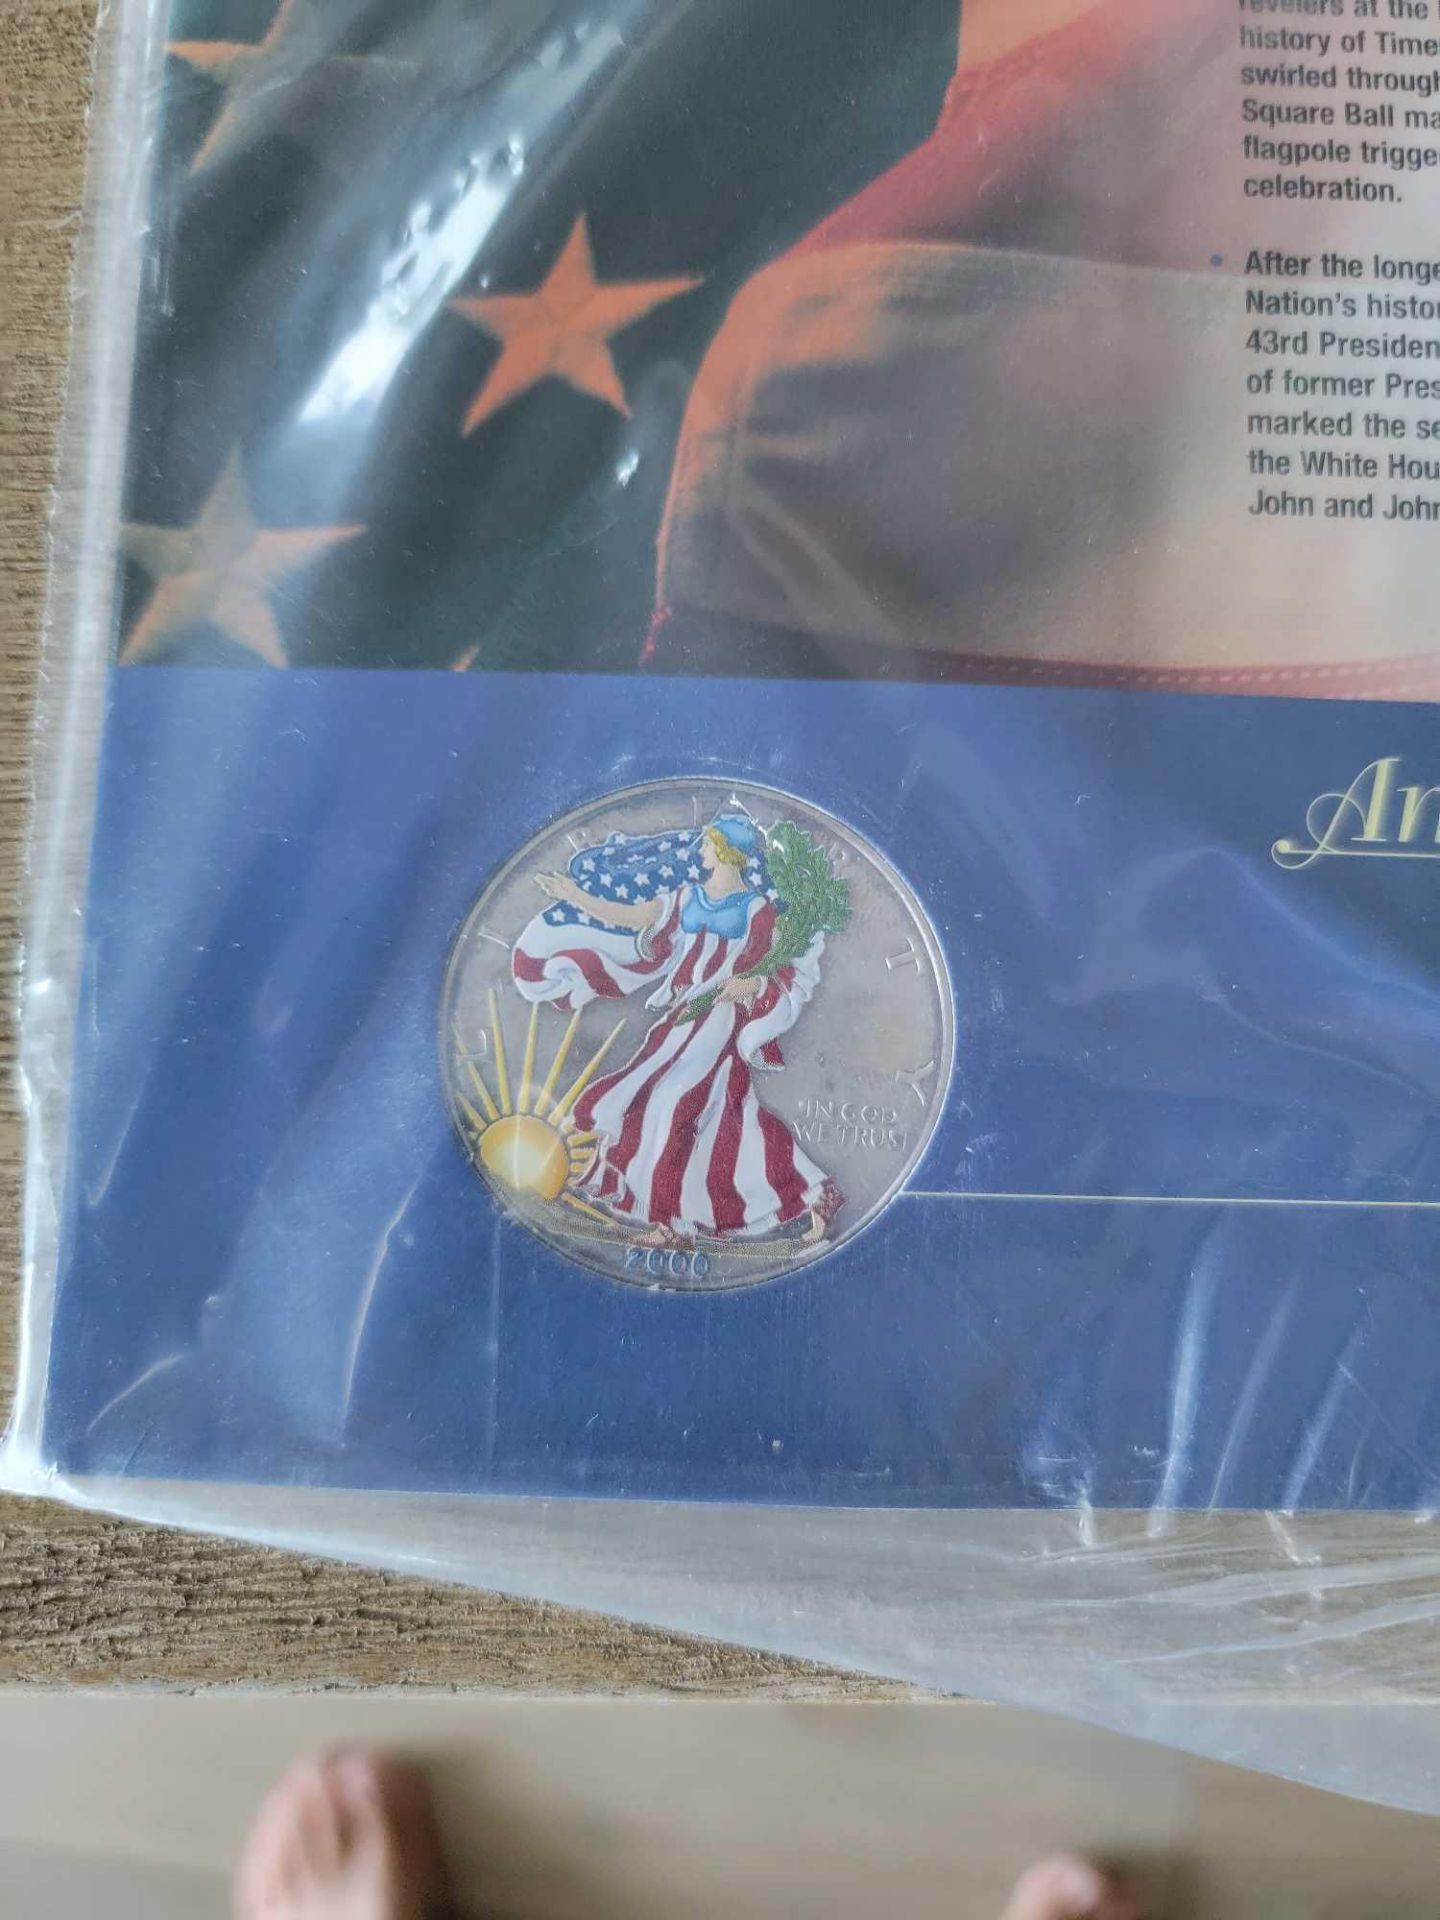 2000 Colored Silver Eagle with Sleeve of Facts - Image 2 of 8